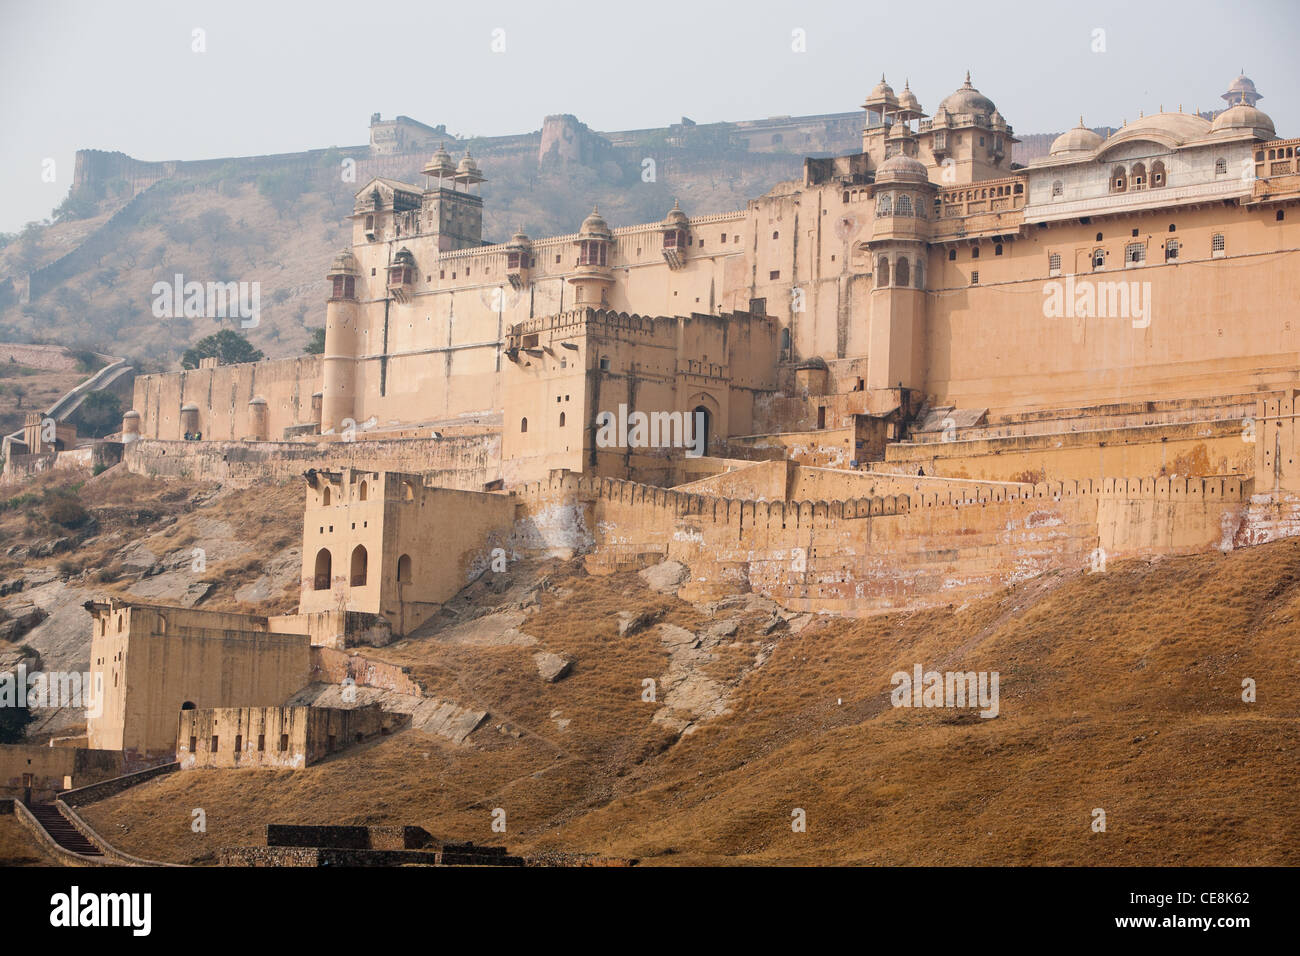 Looking towards Amber Fort, outside Jaipur, in Rajasthan, India Stock Photo